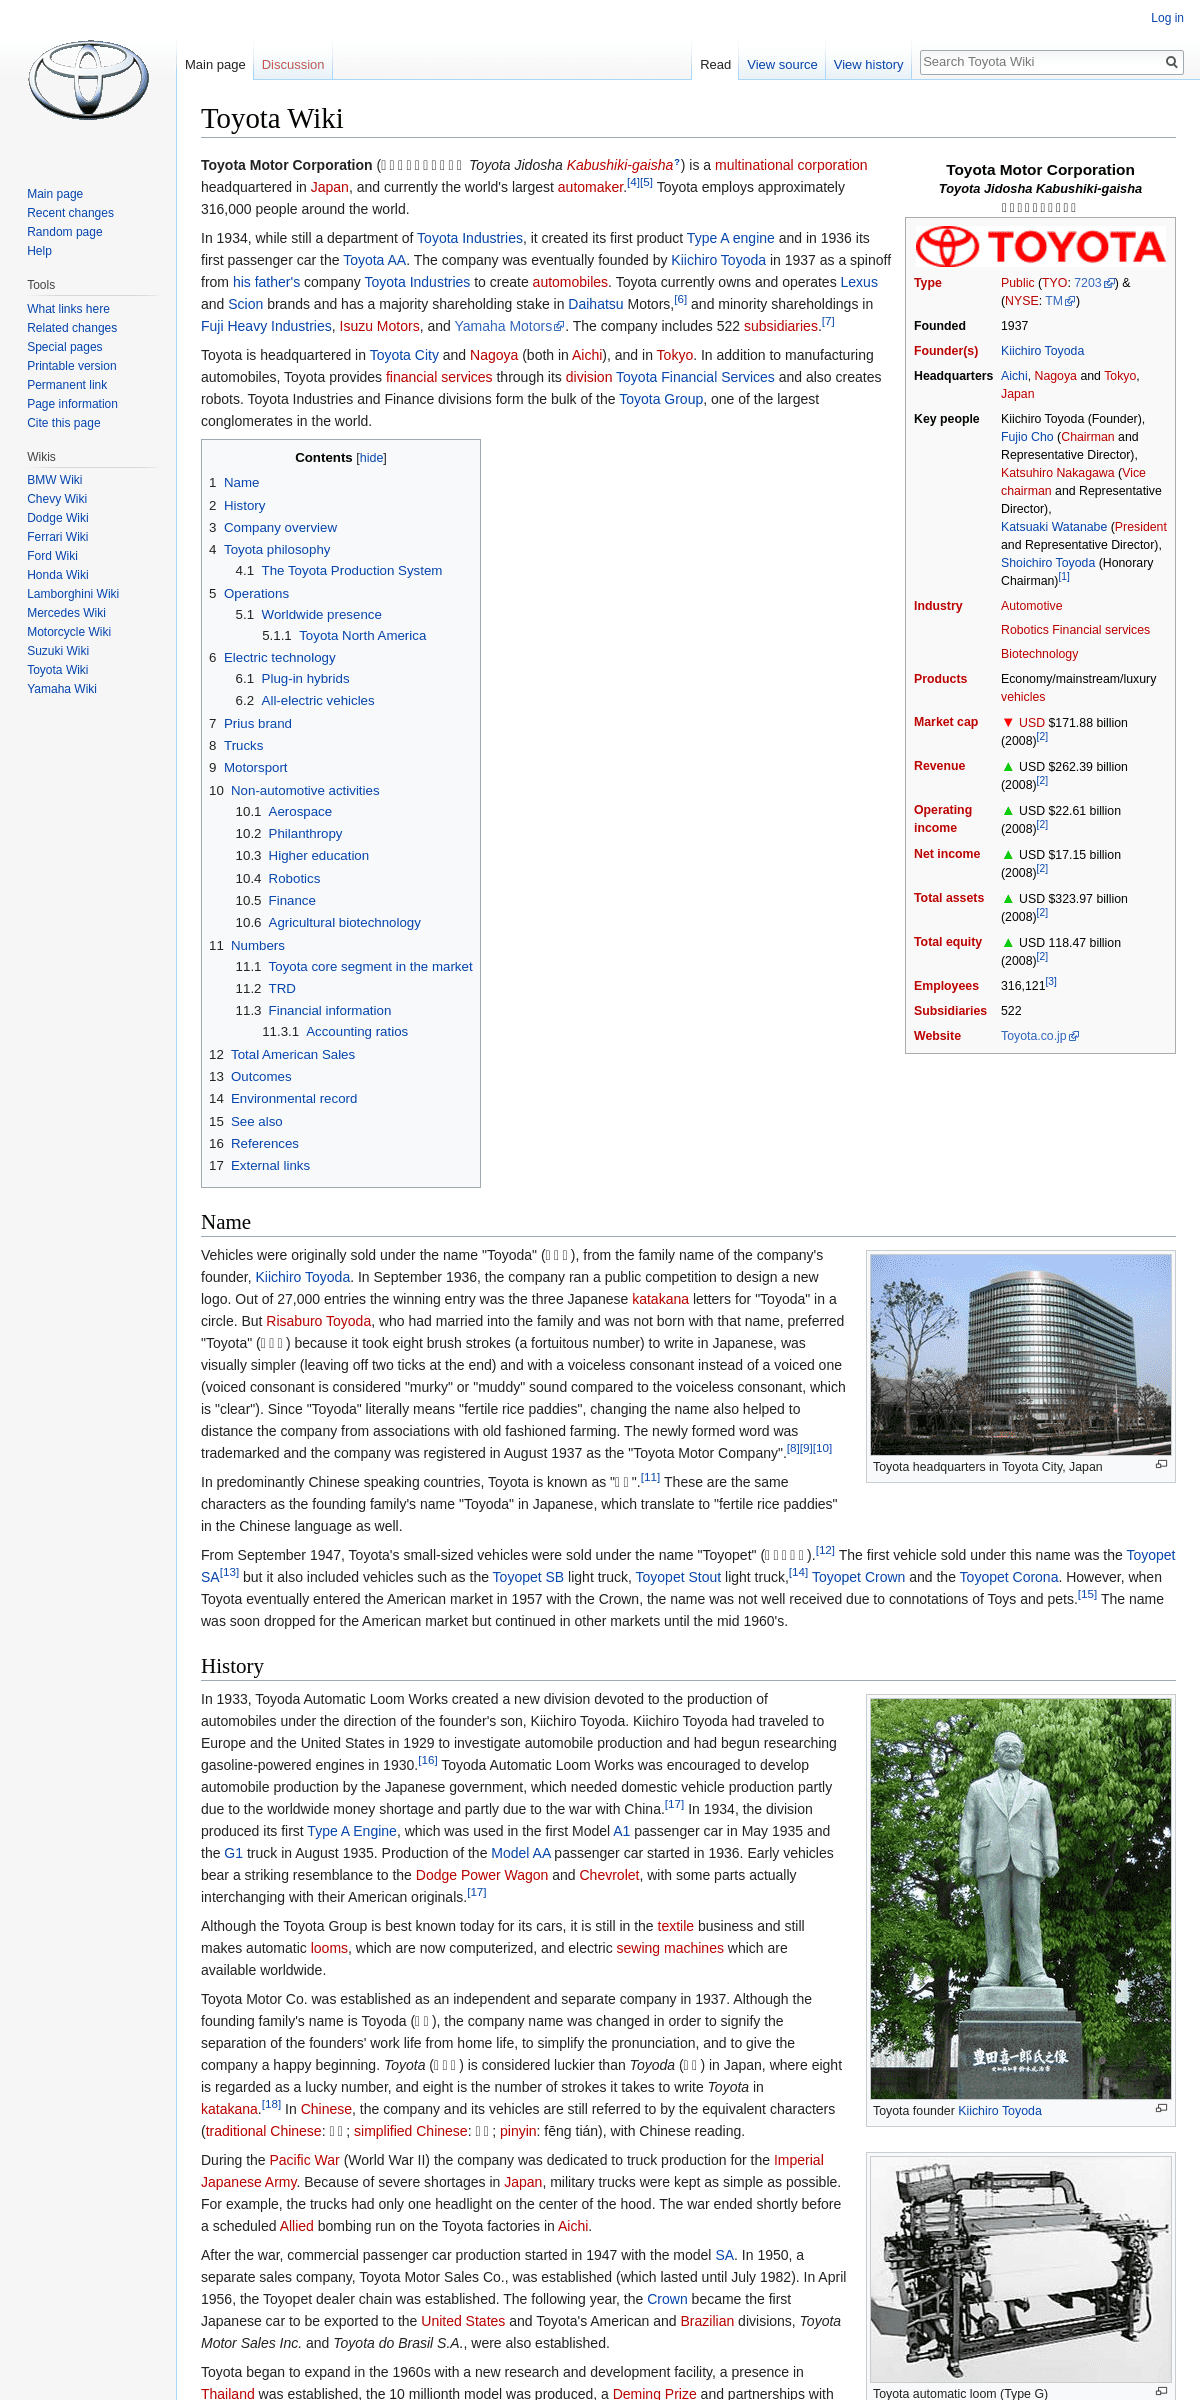 A complete backup of toyota-wiki.com